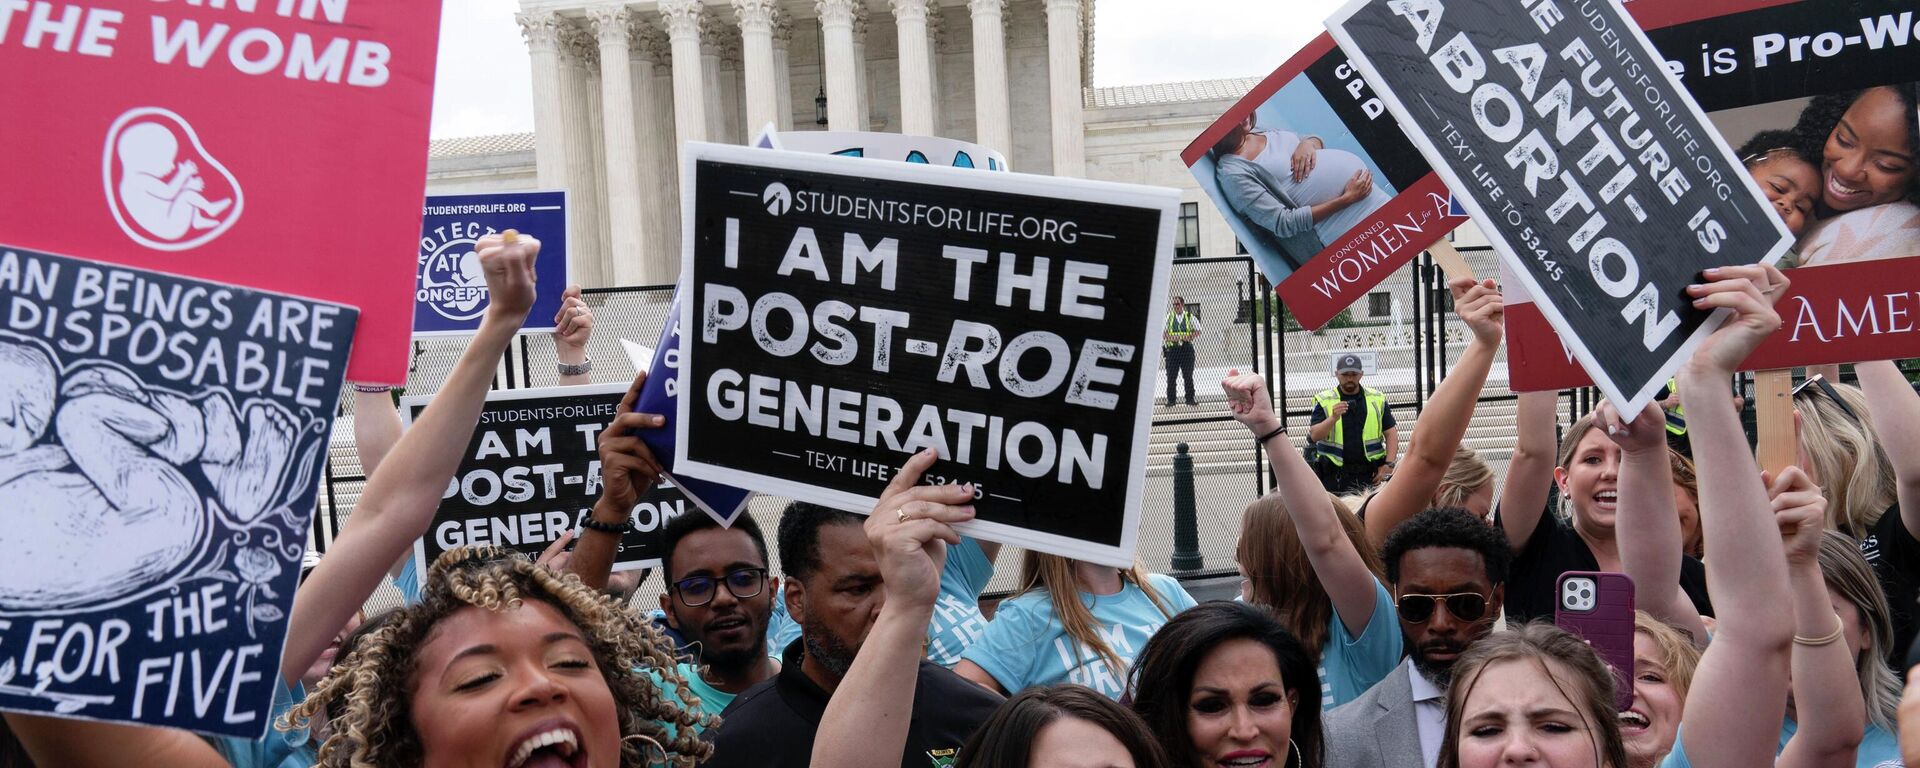 Demonstrators gather outside the Supreme Court in Washington, Friday, June 24, 2022. The Supreme Court has ended constitutional protections for abortion that had been in place nearly 50 years, a decision by its conservative majority to overturn the court's landmark abortion cases. (AP Photo/Jose Luis Magana) - Sputnik International, 1920, 24.06.2022